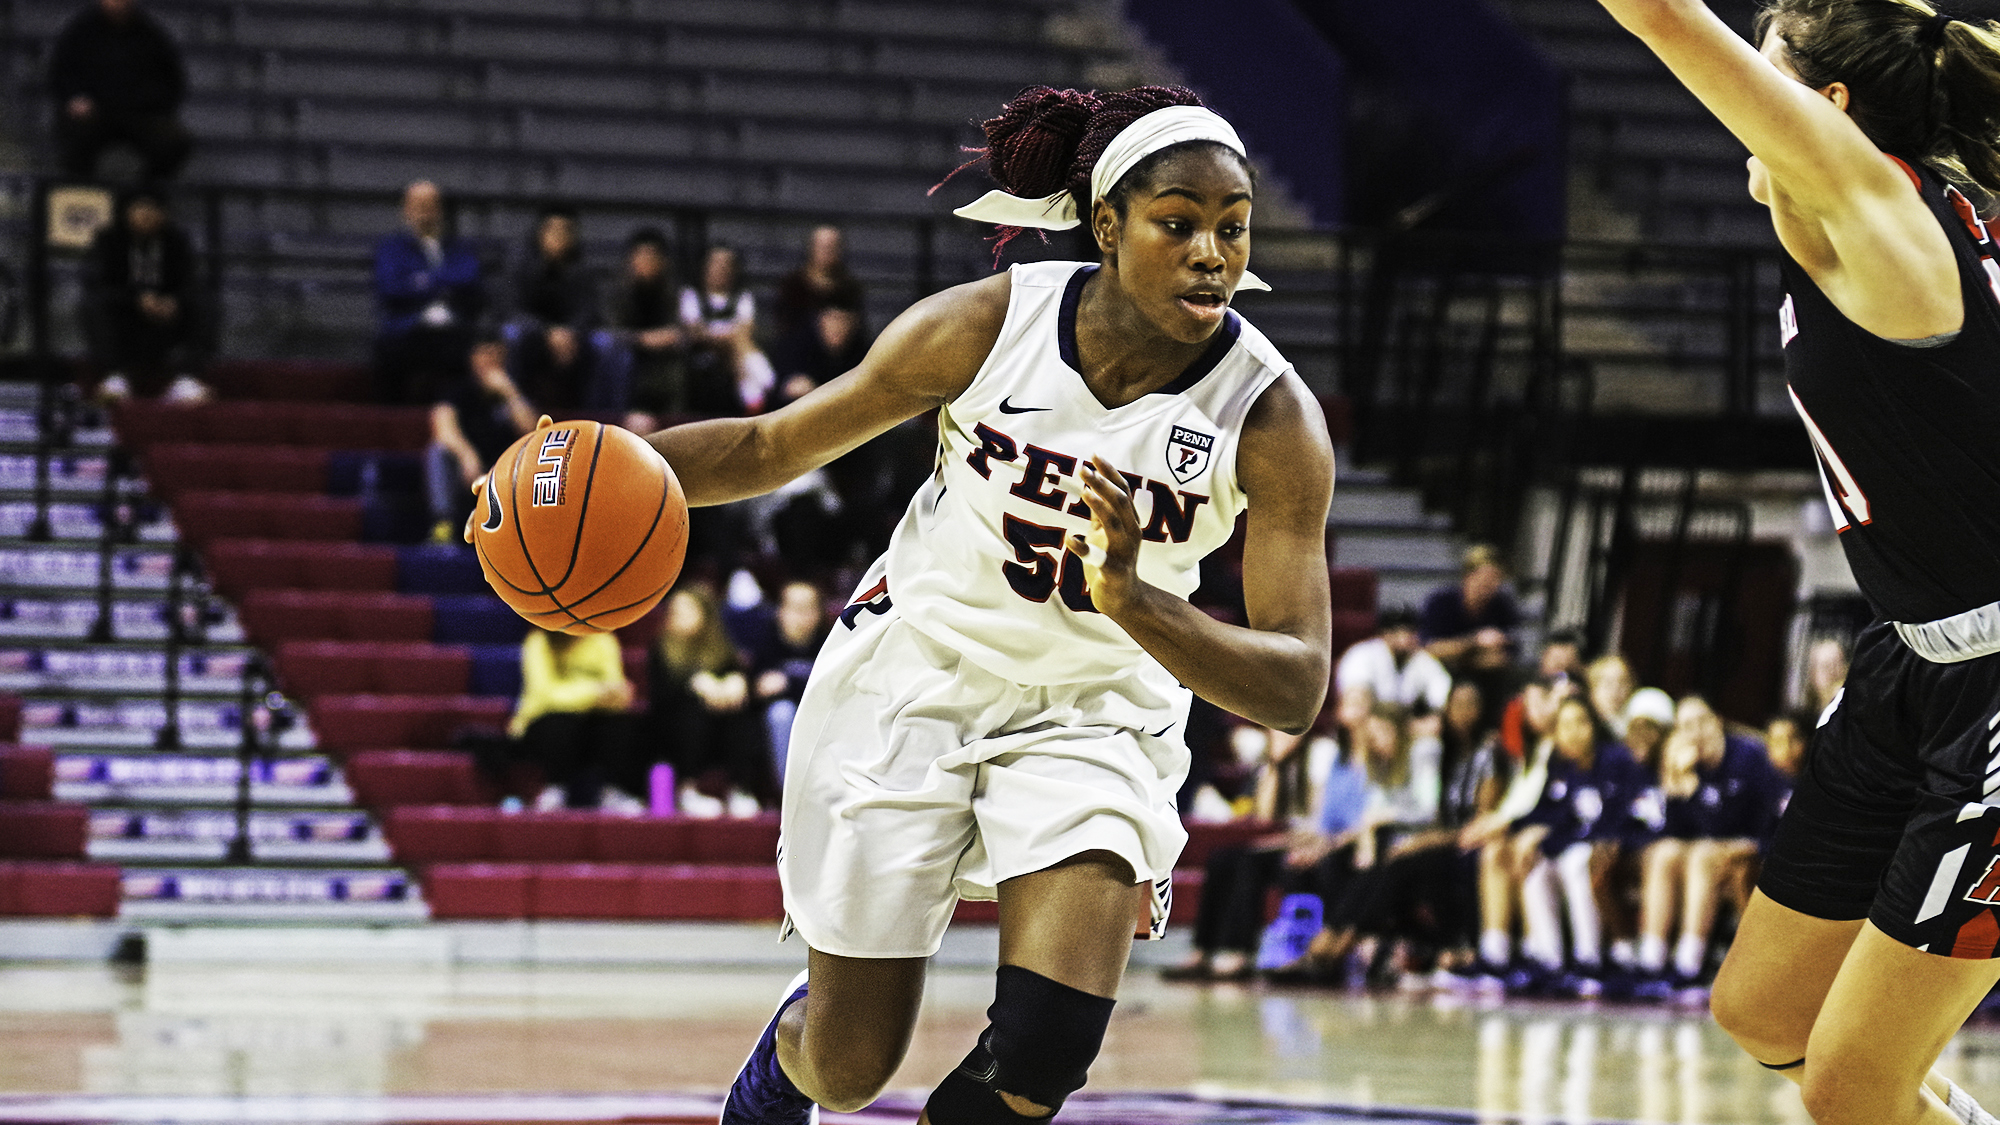 Princess Aghayere dribbles to the basket during a game at the Palestra.